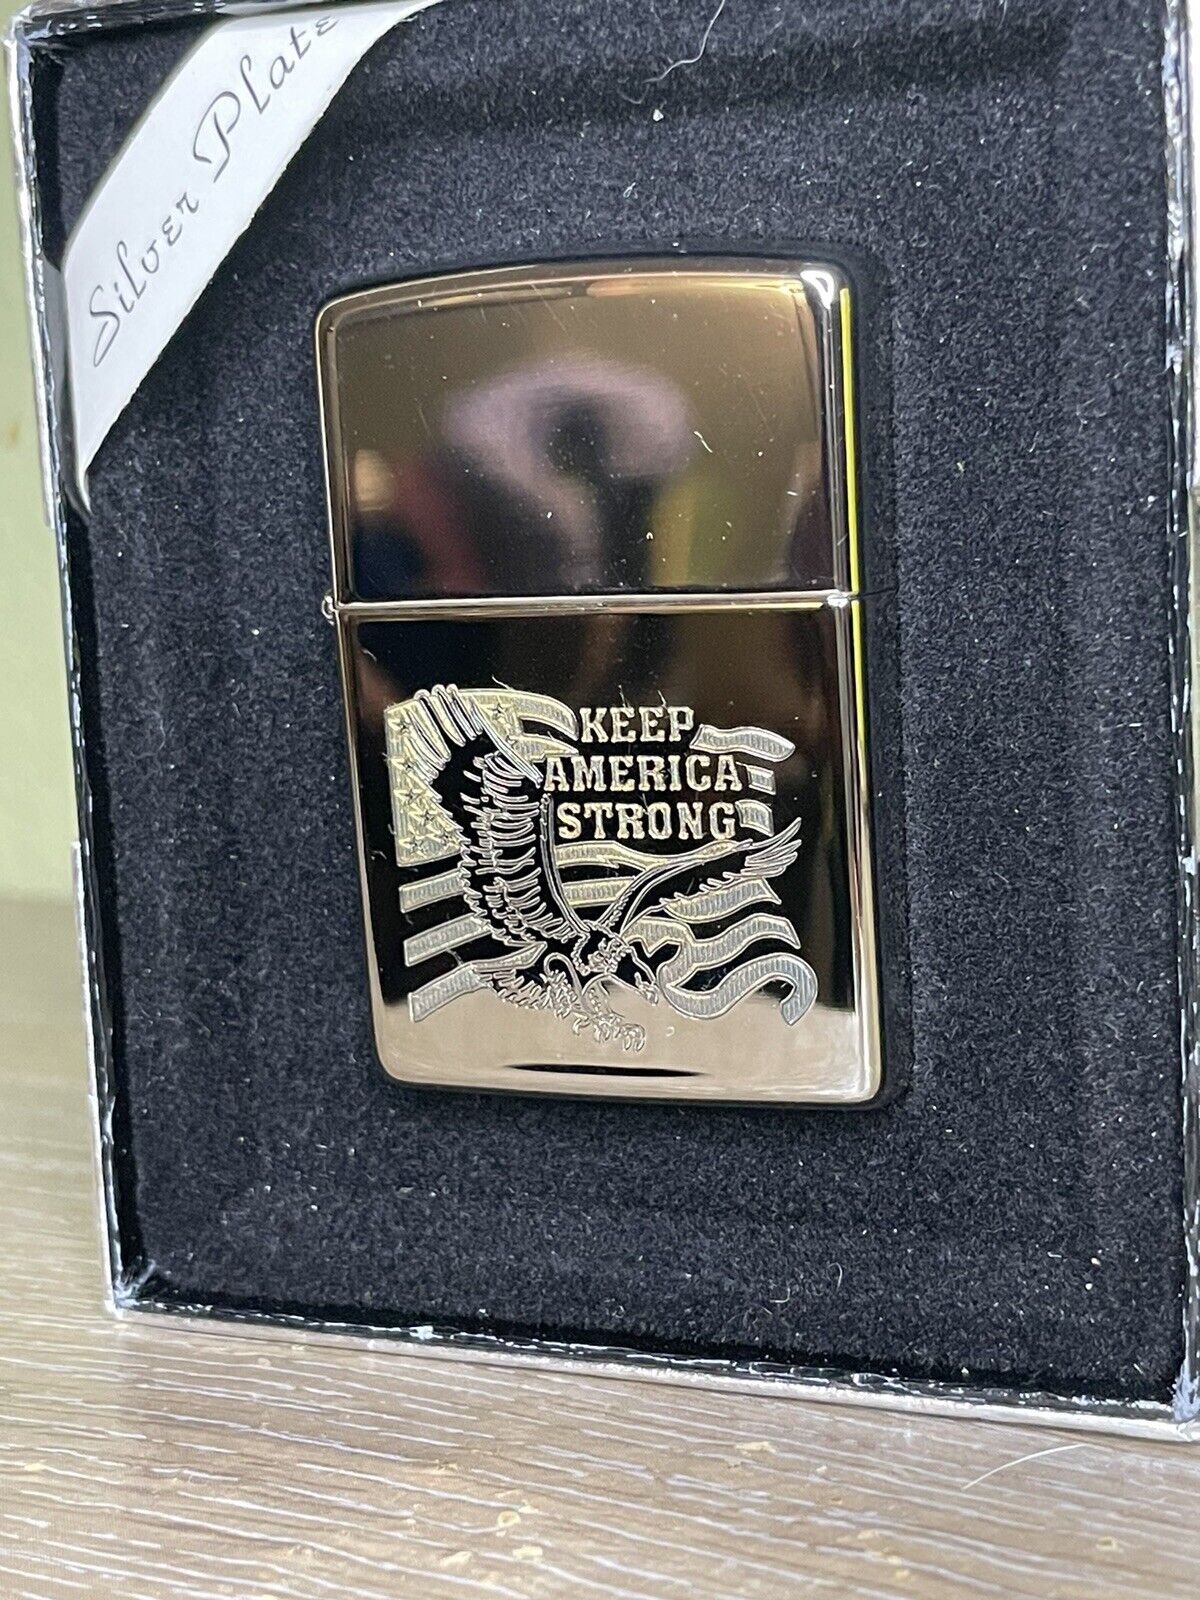 1993 Silver Plated Keep America Strong Limited Edition Zippo Lighter